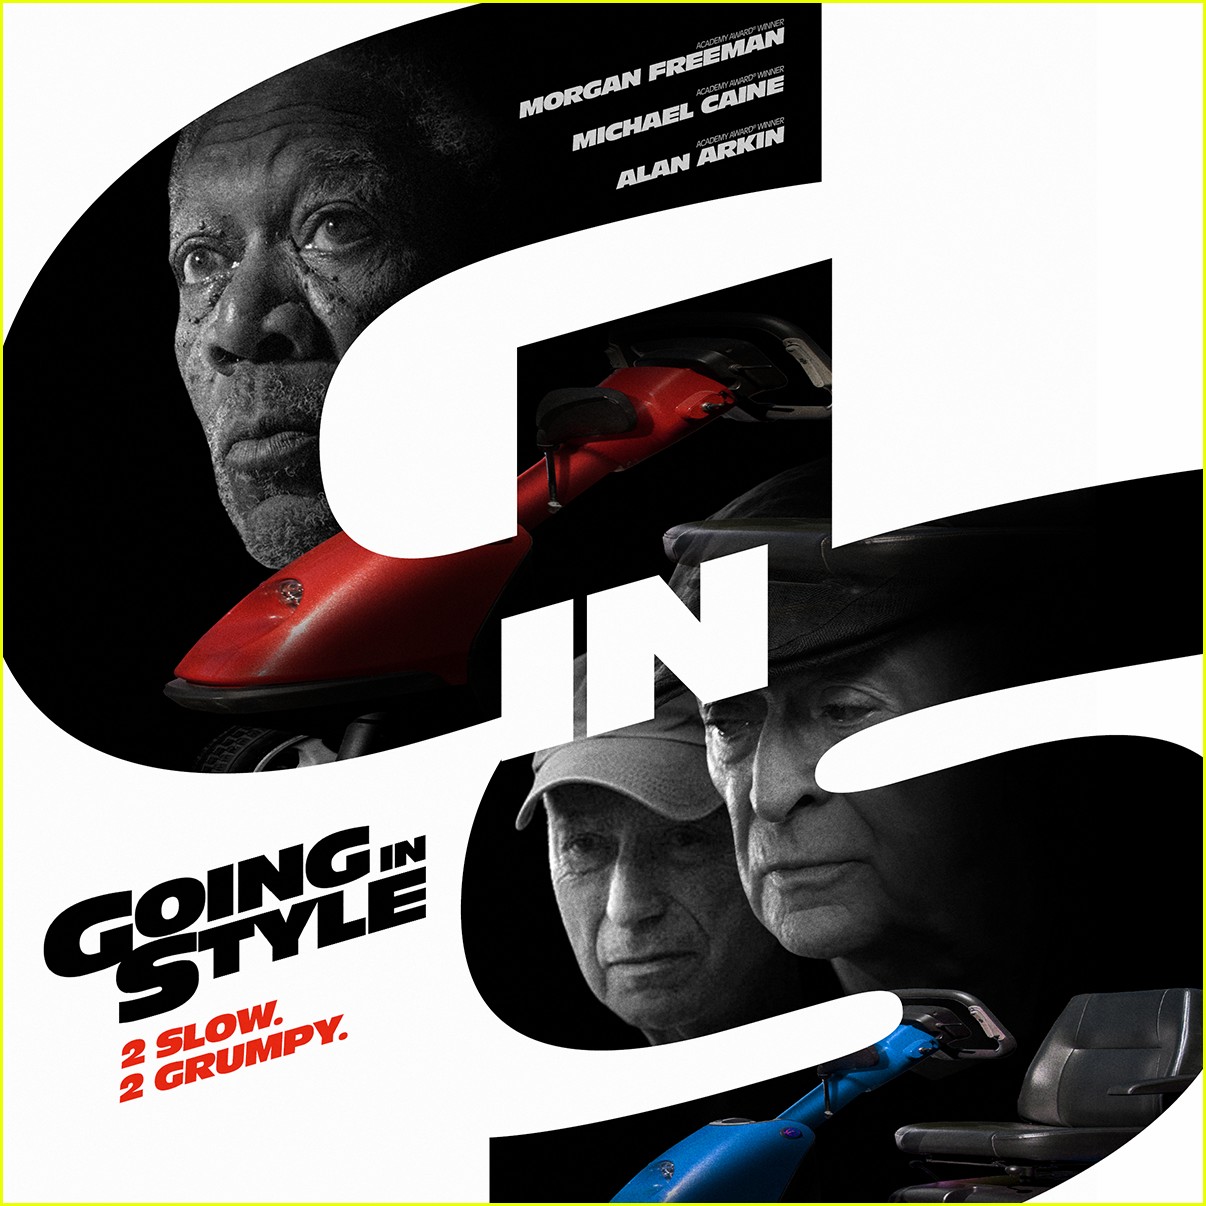 going in style spoofs fast furious with new posters 03